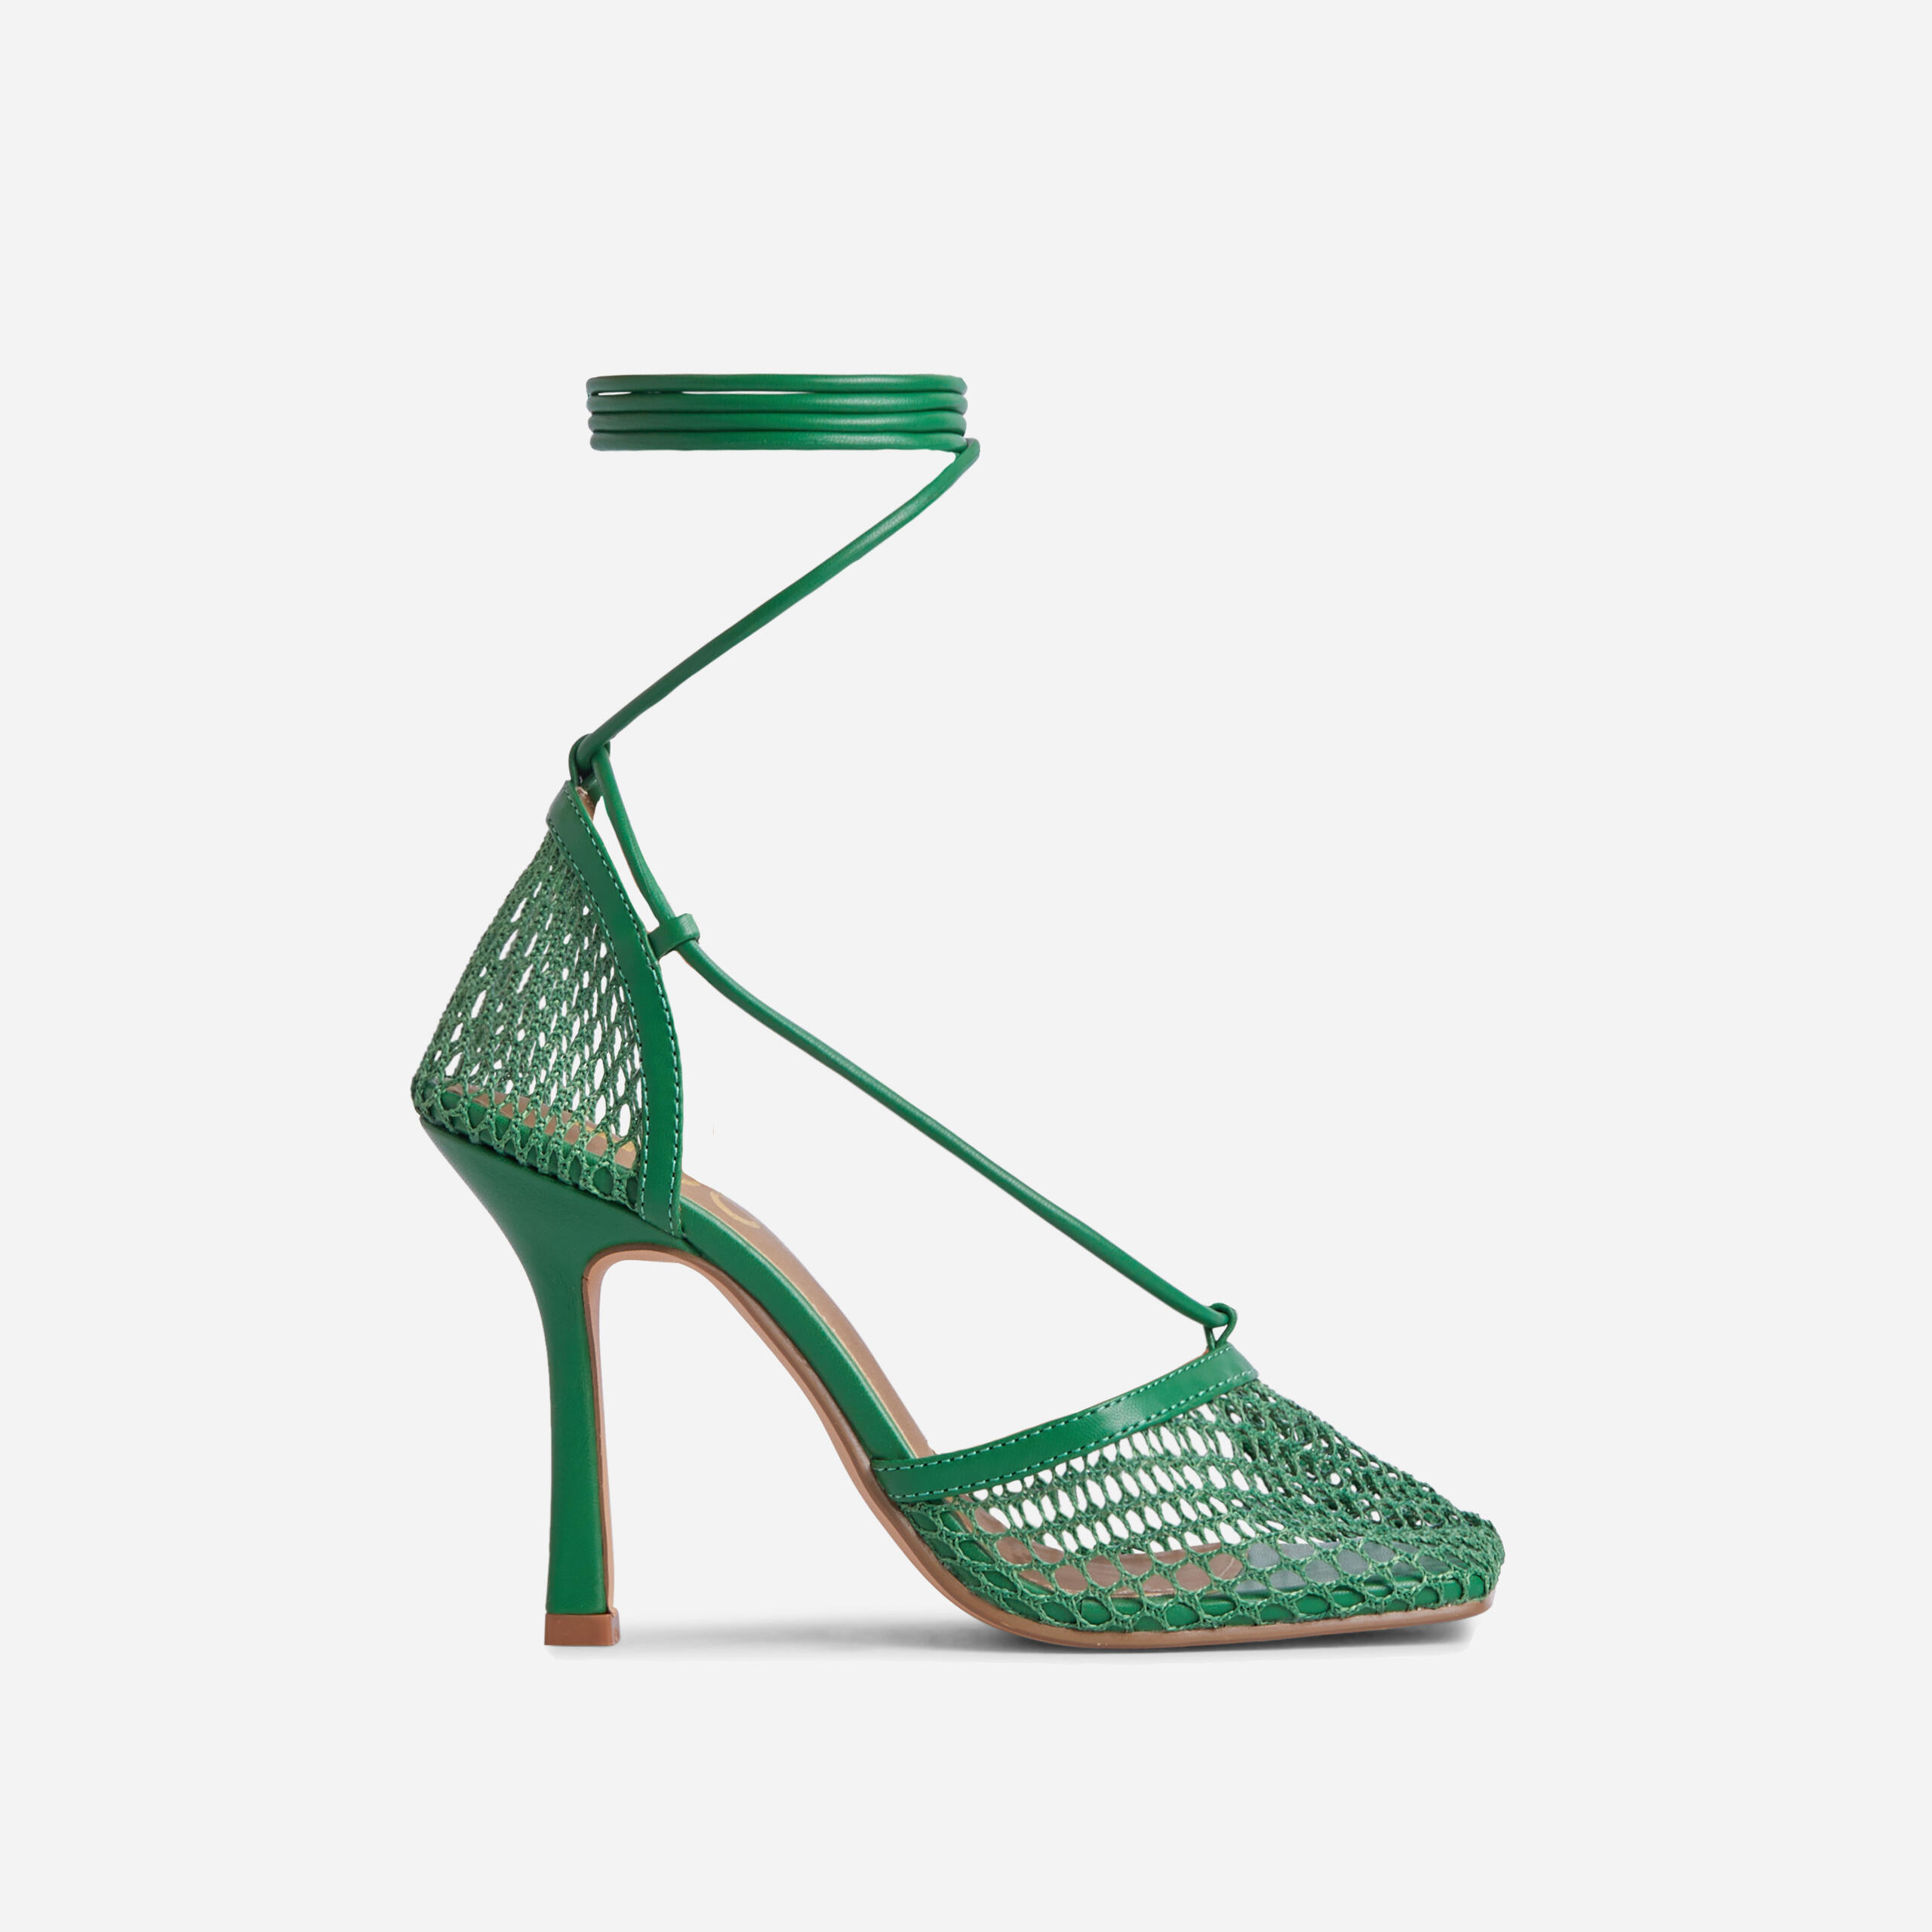 New Me Lace Up Square Toe Court Heel In Green Fishnet 